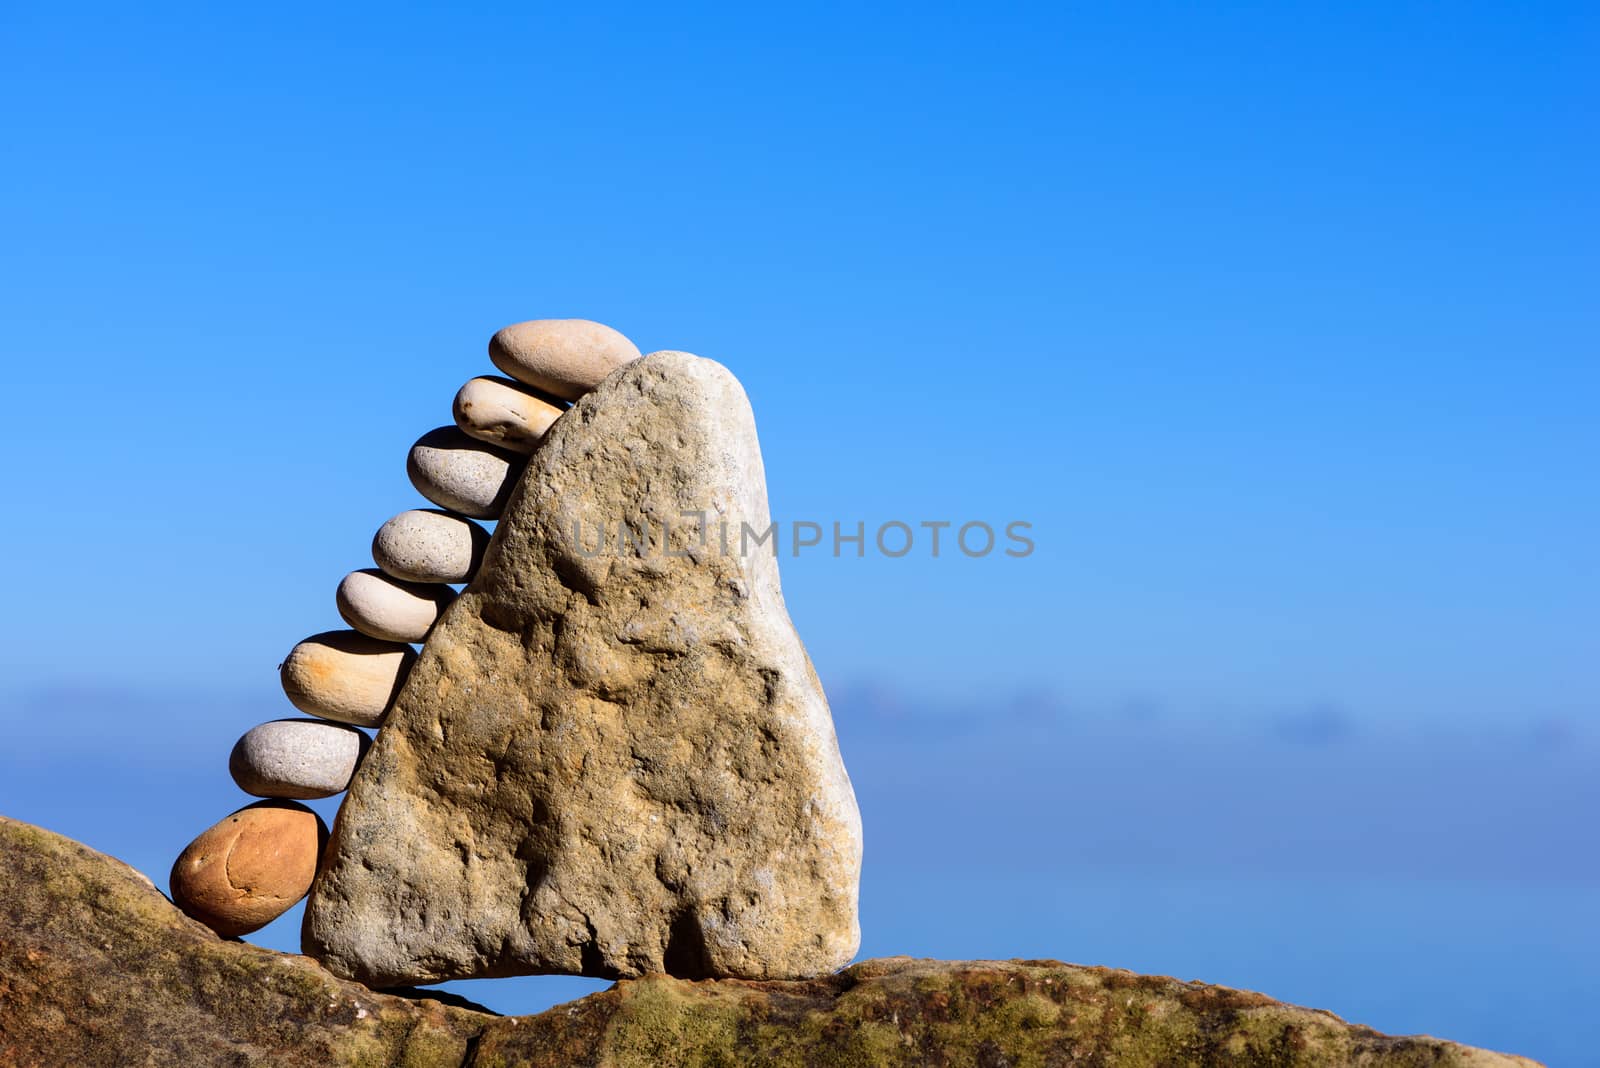 Balancing of pebbles each other on the stone